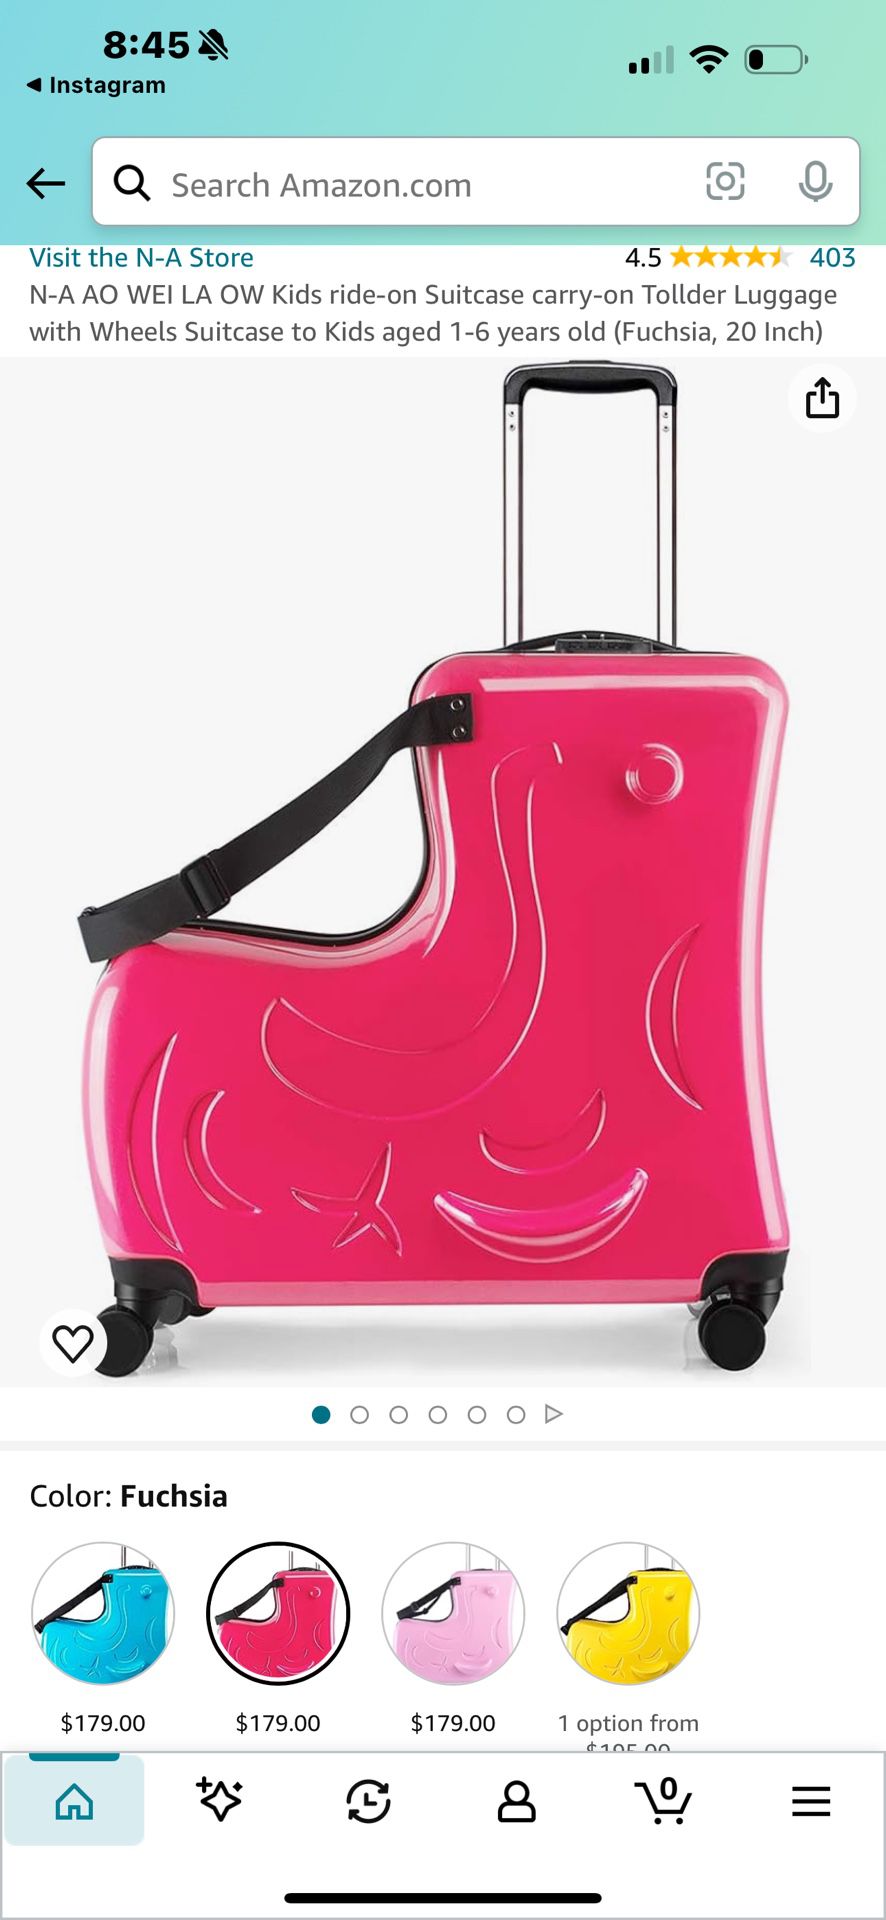 AO WEI LA OW Kids ride-on Suitcase carry-on Tollder Luggage with Wheels Suitcase to Kids aged 1-6 years old (pink 20 Inch) Nice